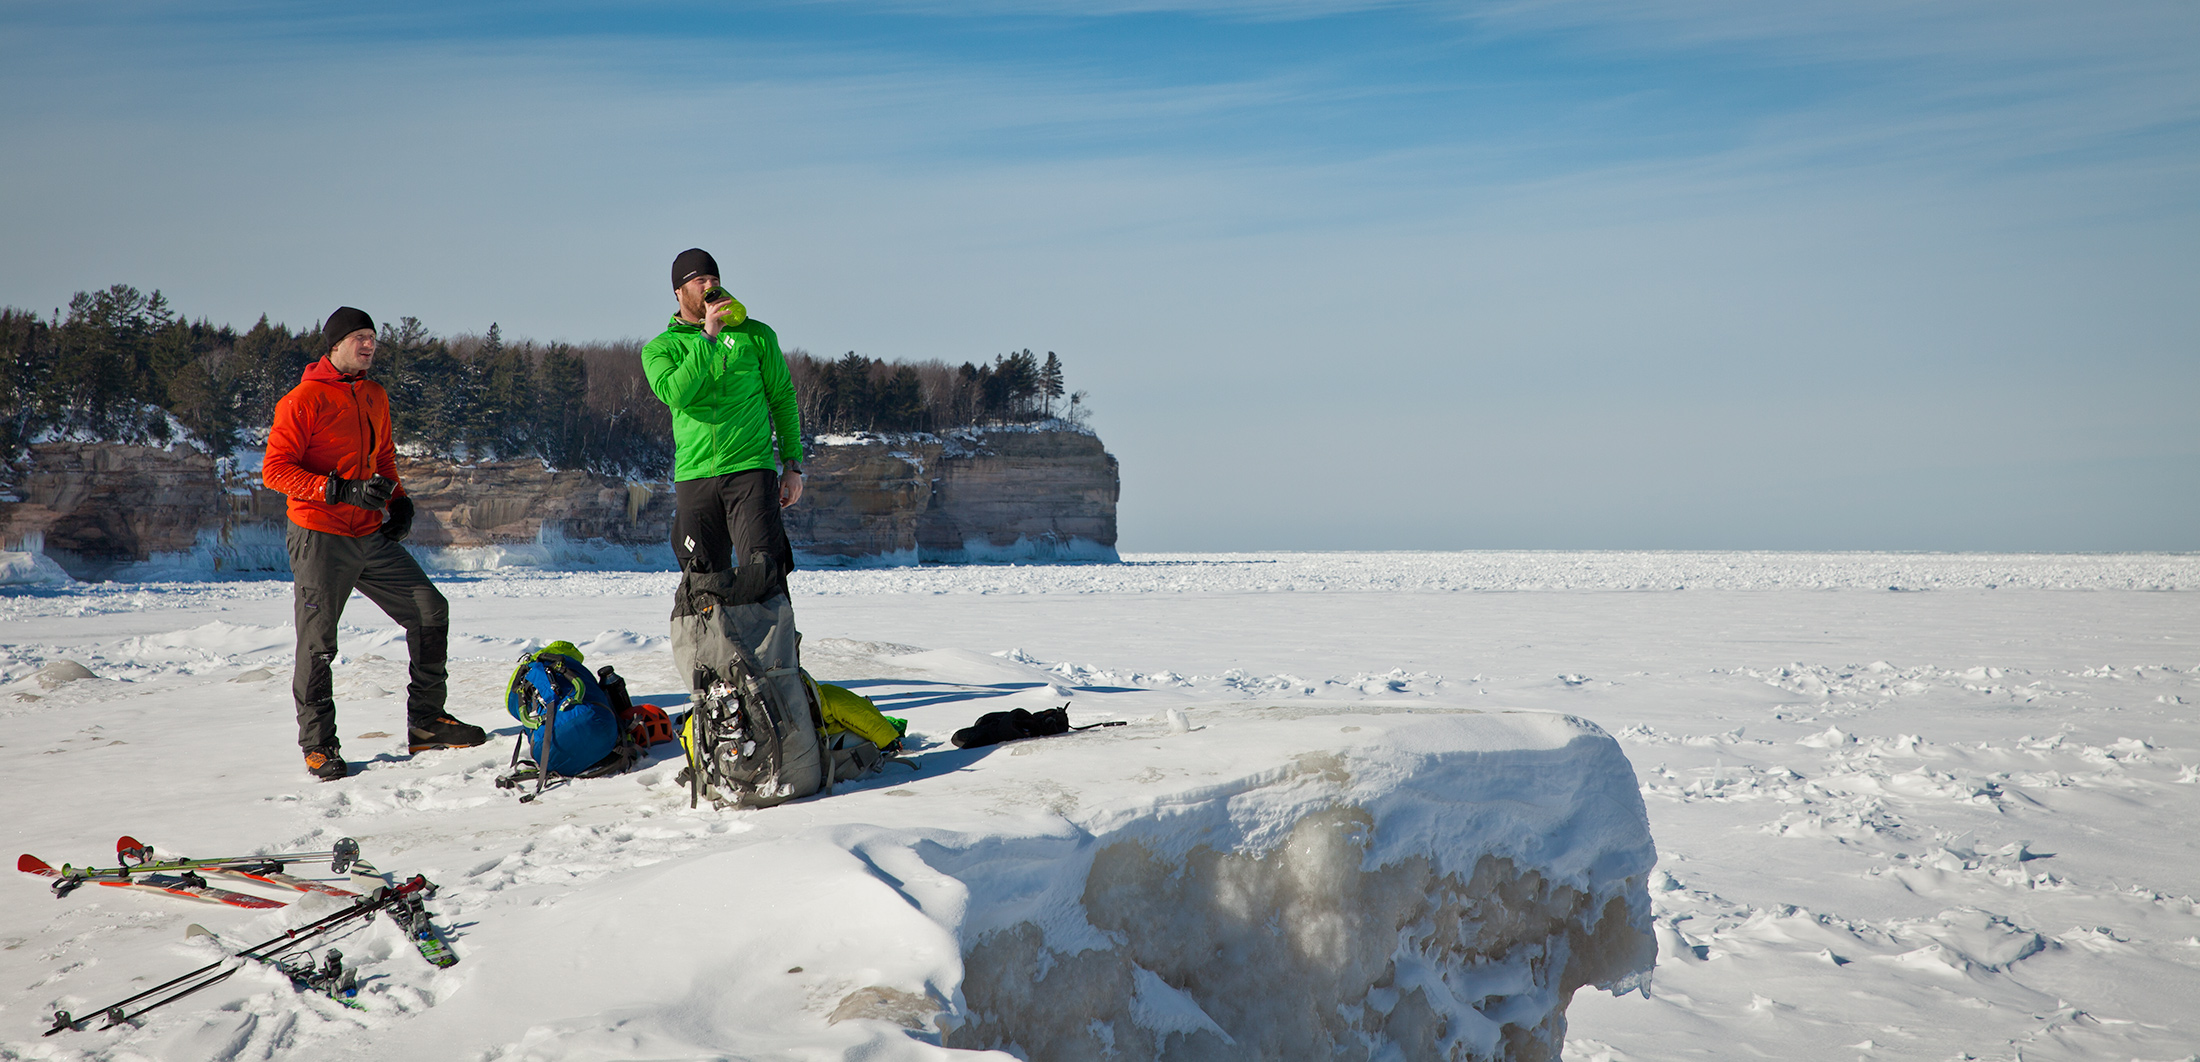  Adam Dailey and Jon Jugenheimer take a rest at Chapel Beach after skiing several miles through the woods of Pictured Rocks National Lakeshore. 